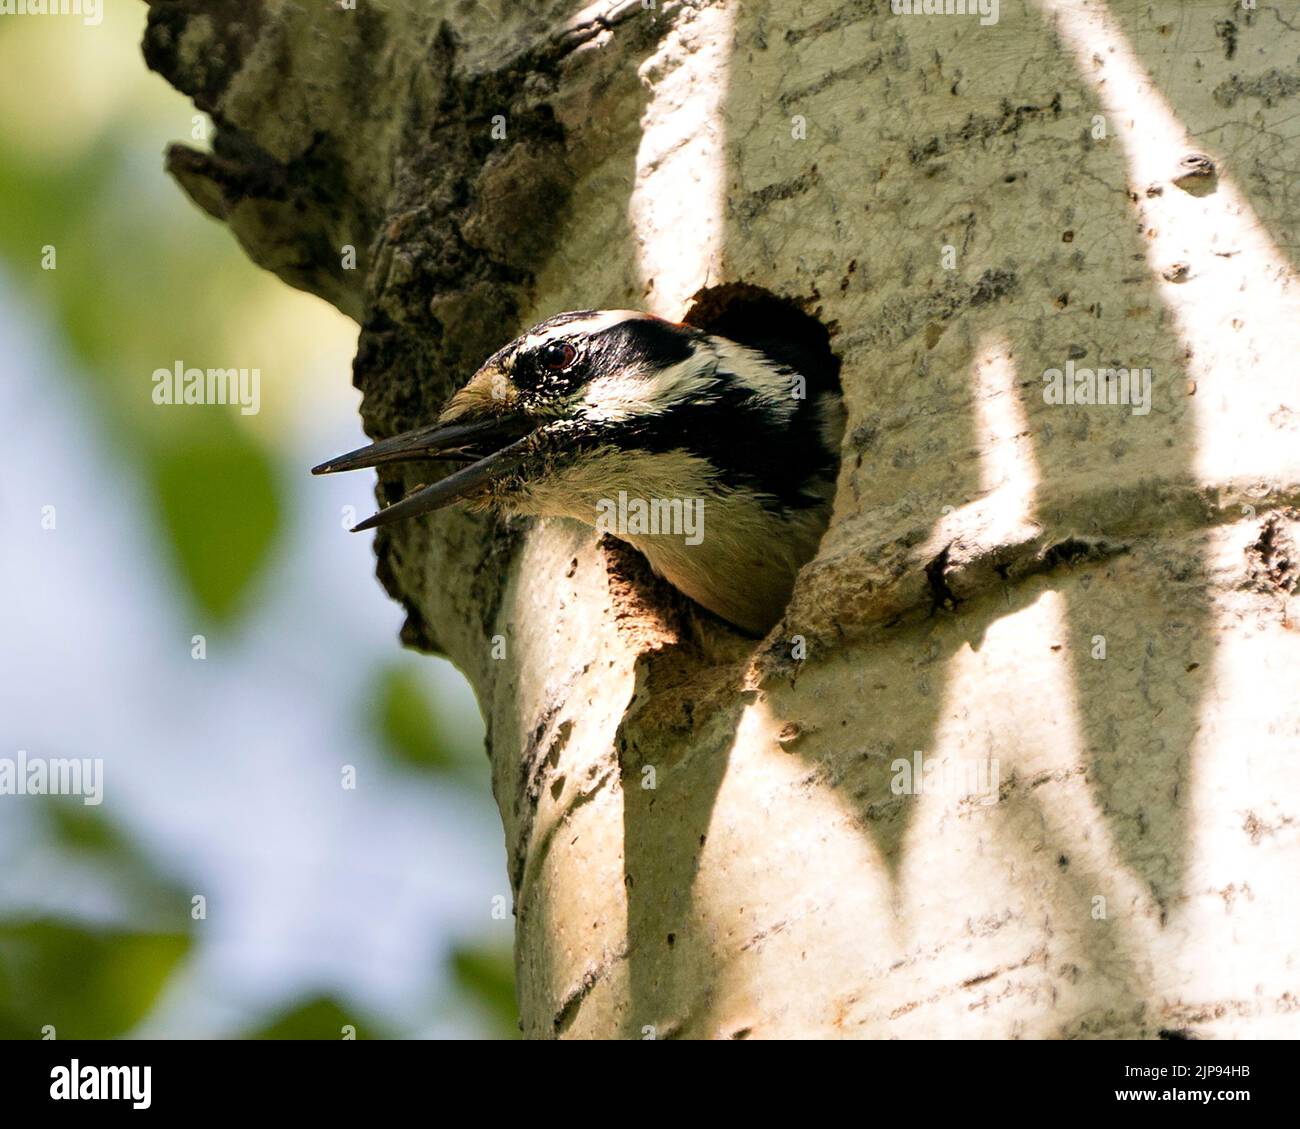 Woodpecker head out of its bird nest home guarding and protecting the nest in its environment and habitat surrounding. Head shot. Woodpecker Hairy Ima Stock Photo